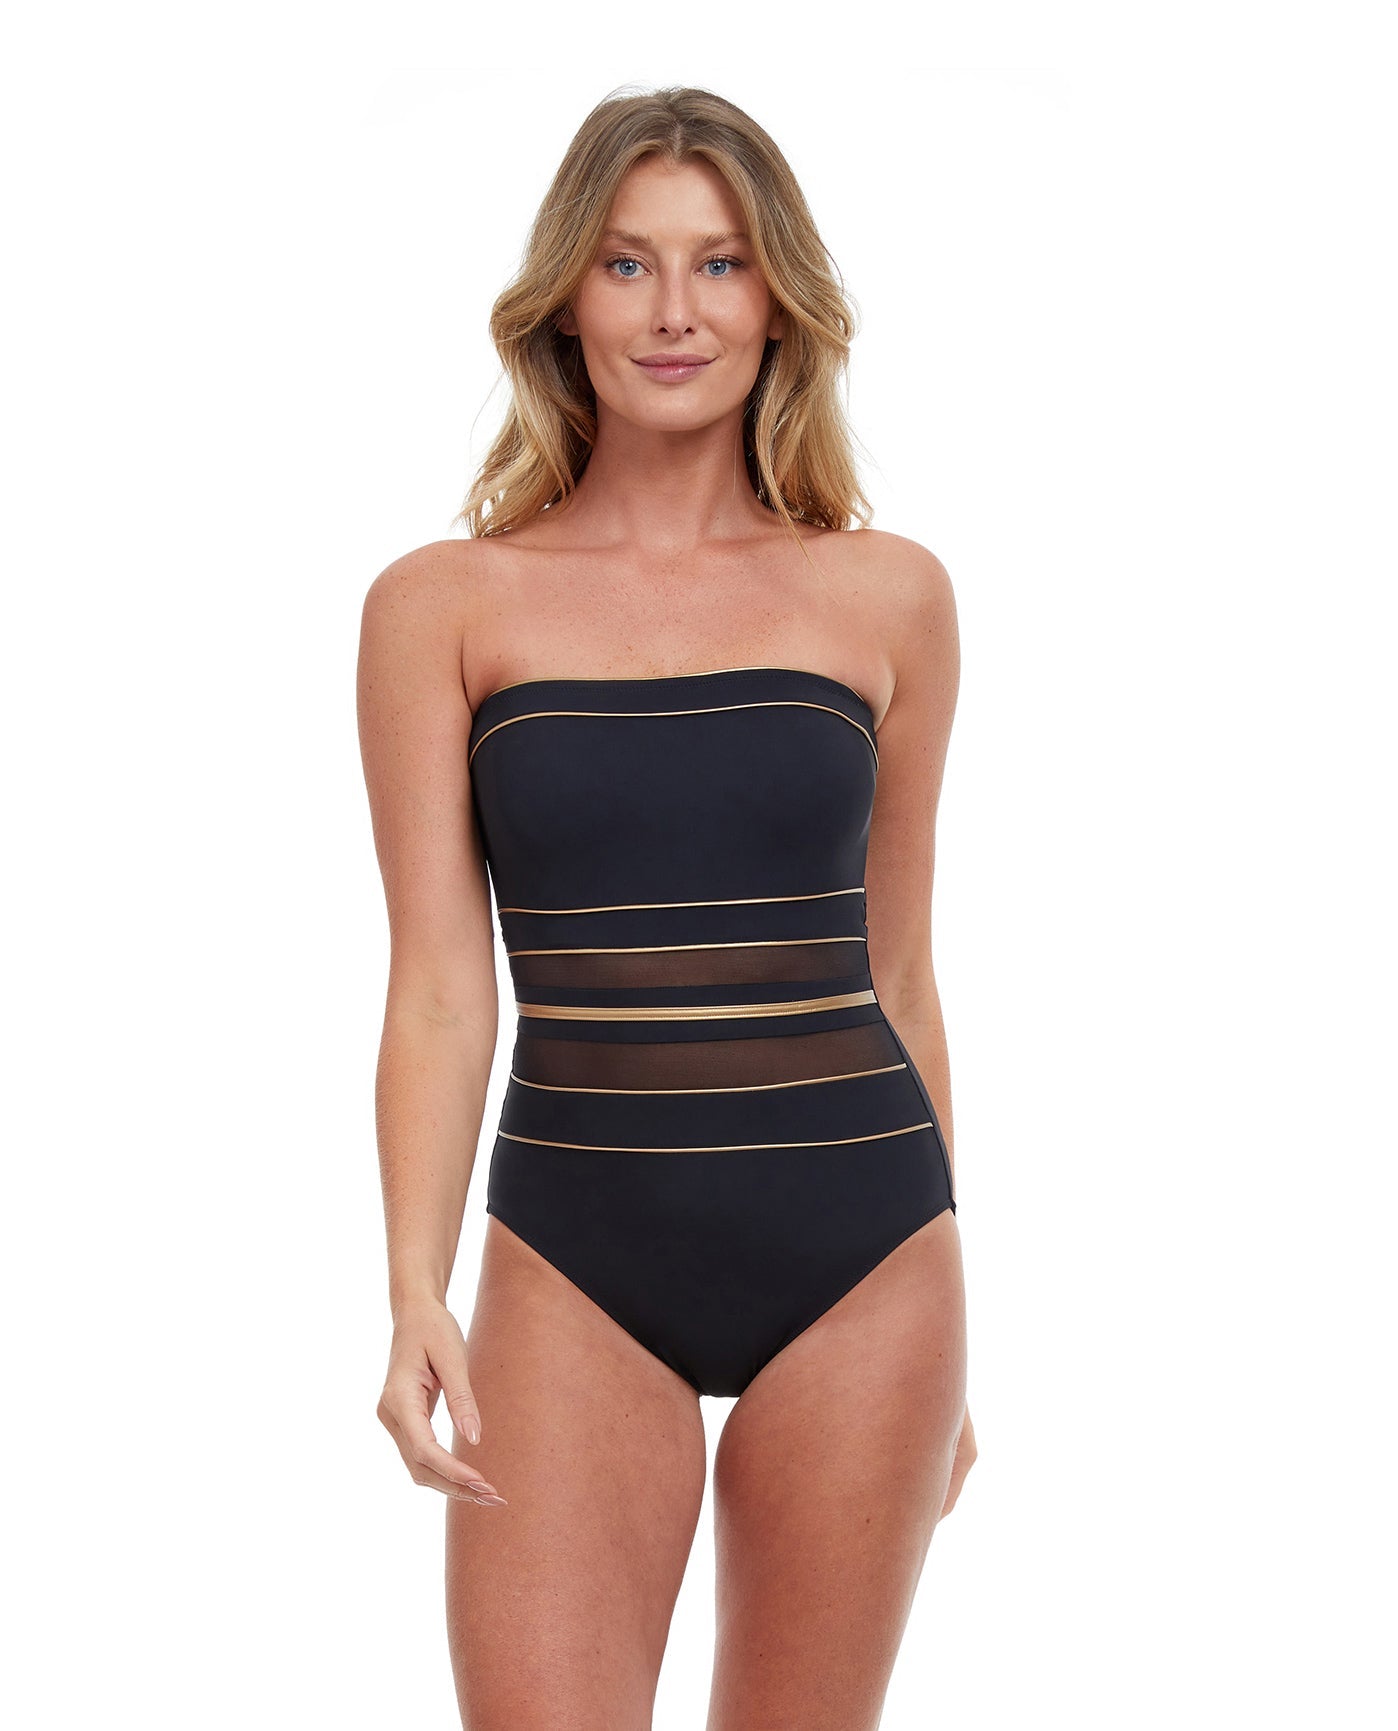 Front View Of Gottex Essentials Onyx Bandeau Strapless One Piece Swimsuit | Gottex Onyx Black And Gold